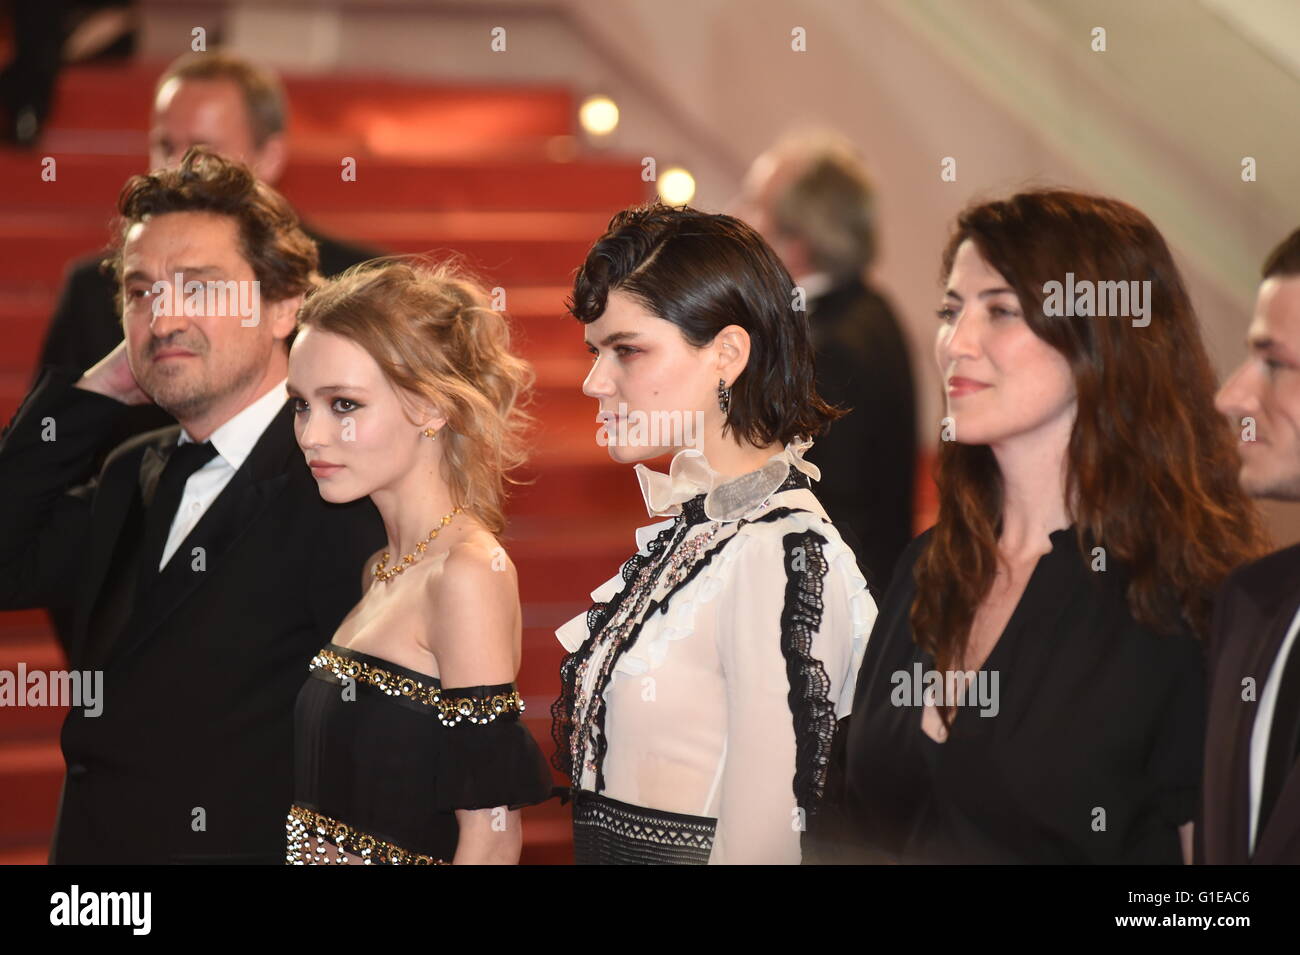 Cannes, France. 13th May, 2016. (L-R) French actor Louis-Do de Lencquesaing, French US actress Lily-Rose Depp, French actress Soko, French director Stephanie Di Giusto arrive for the screening of 'I, Daniel Blake during the 69th annual Cannes Film Festival, in Cannes, France, 13 May 2016. Photo: Felix Hoerhager/dpa/Alamy Live News Stock Photo